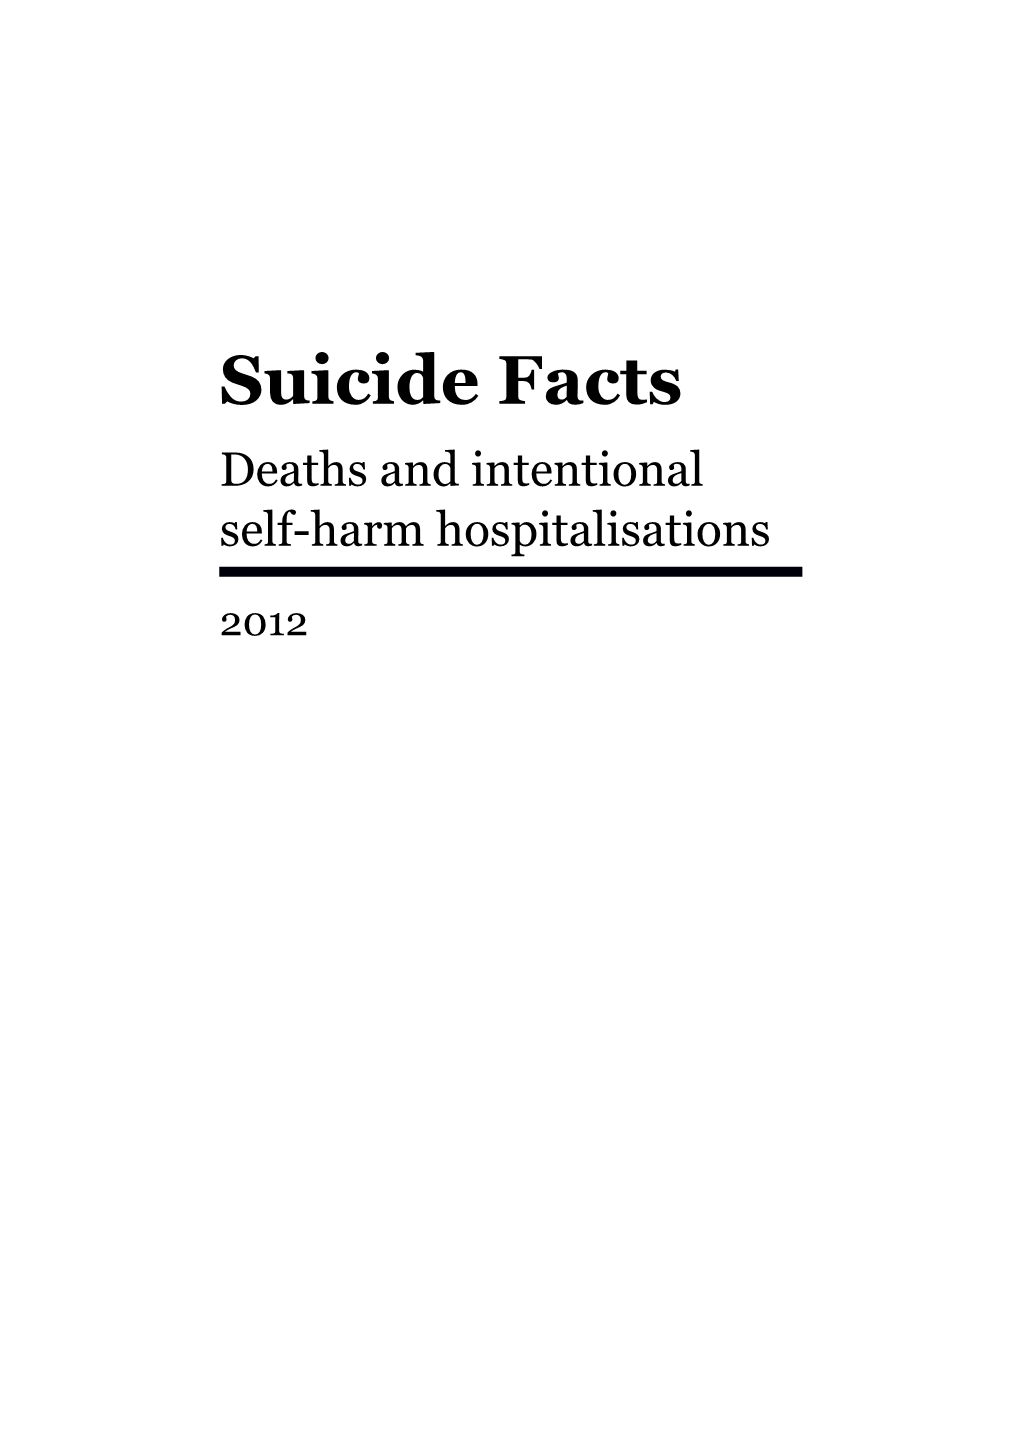 Suicide Facts Deaths and Intentional Self-Harm Hospitalisations 2011